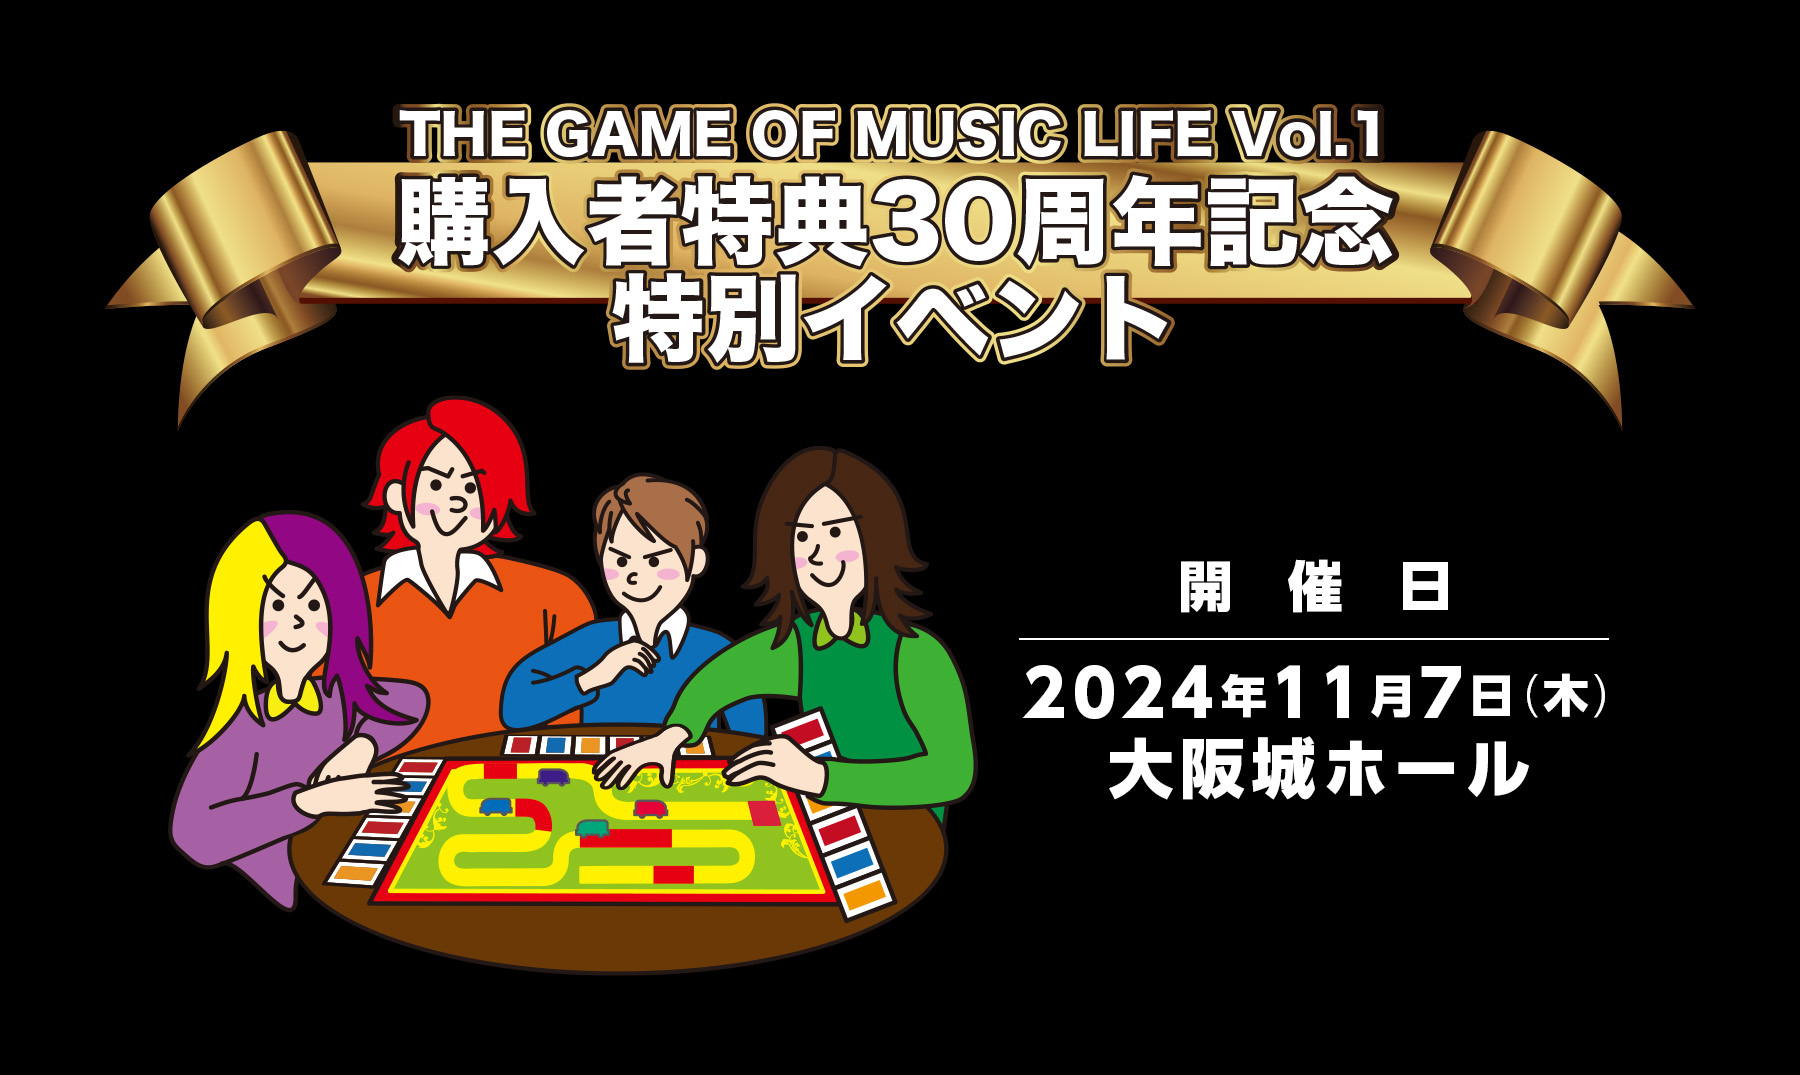 「THE GAME OF MUSIC LIFE Vol.1」30周年記念特別イベント